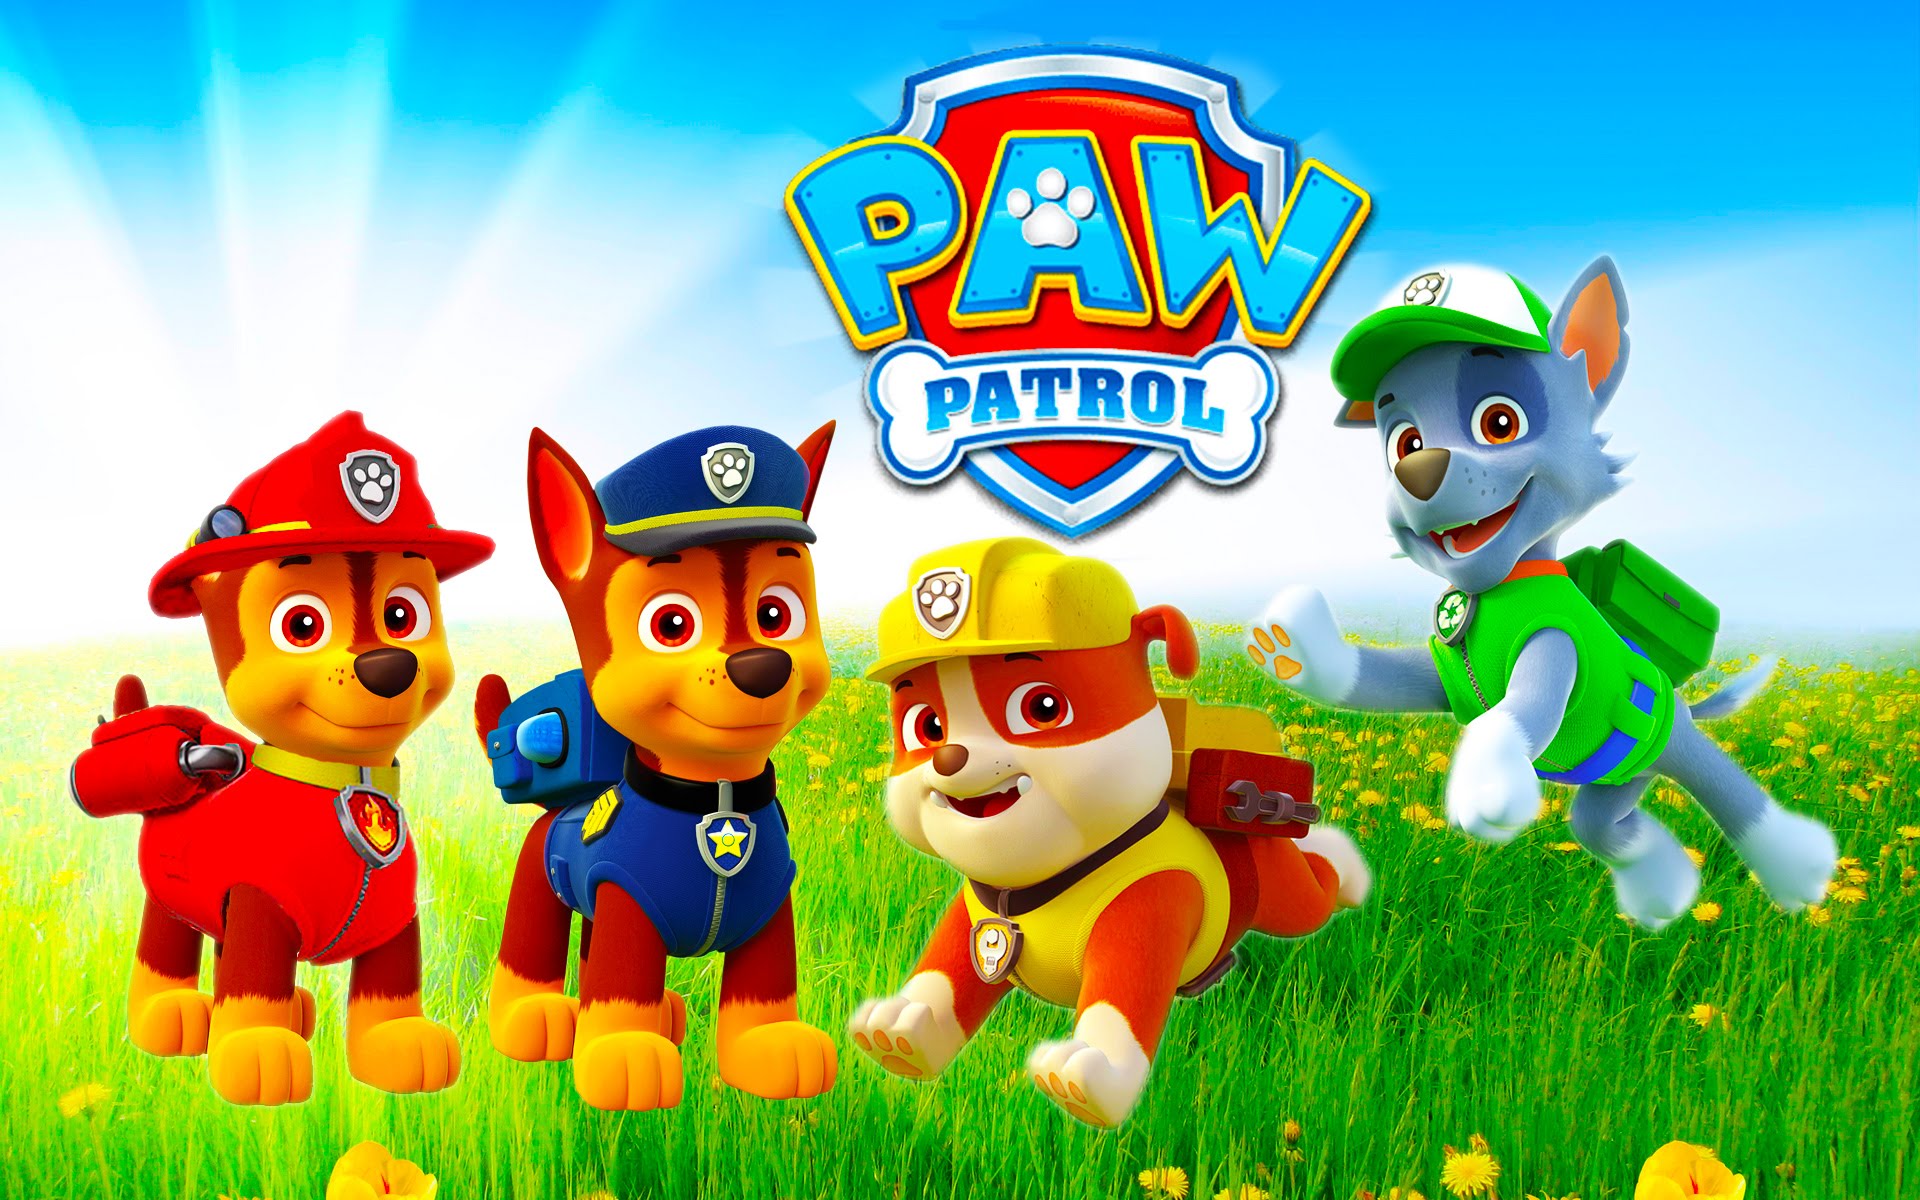 Paw Patrol Chase, Paw Patrol Rubble, Paw Patrol Marshall and Funny ToysUsa Channel